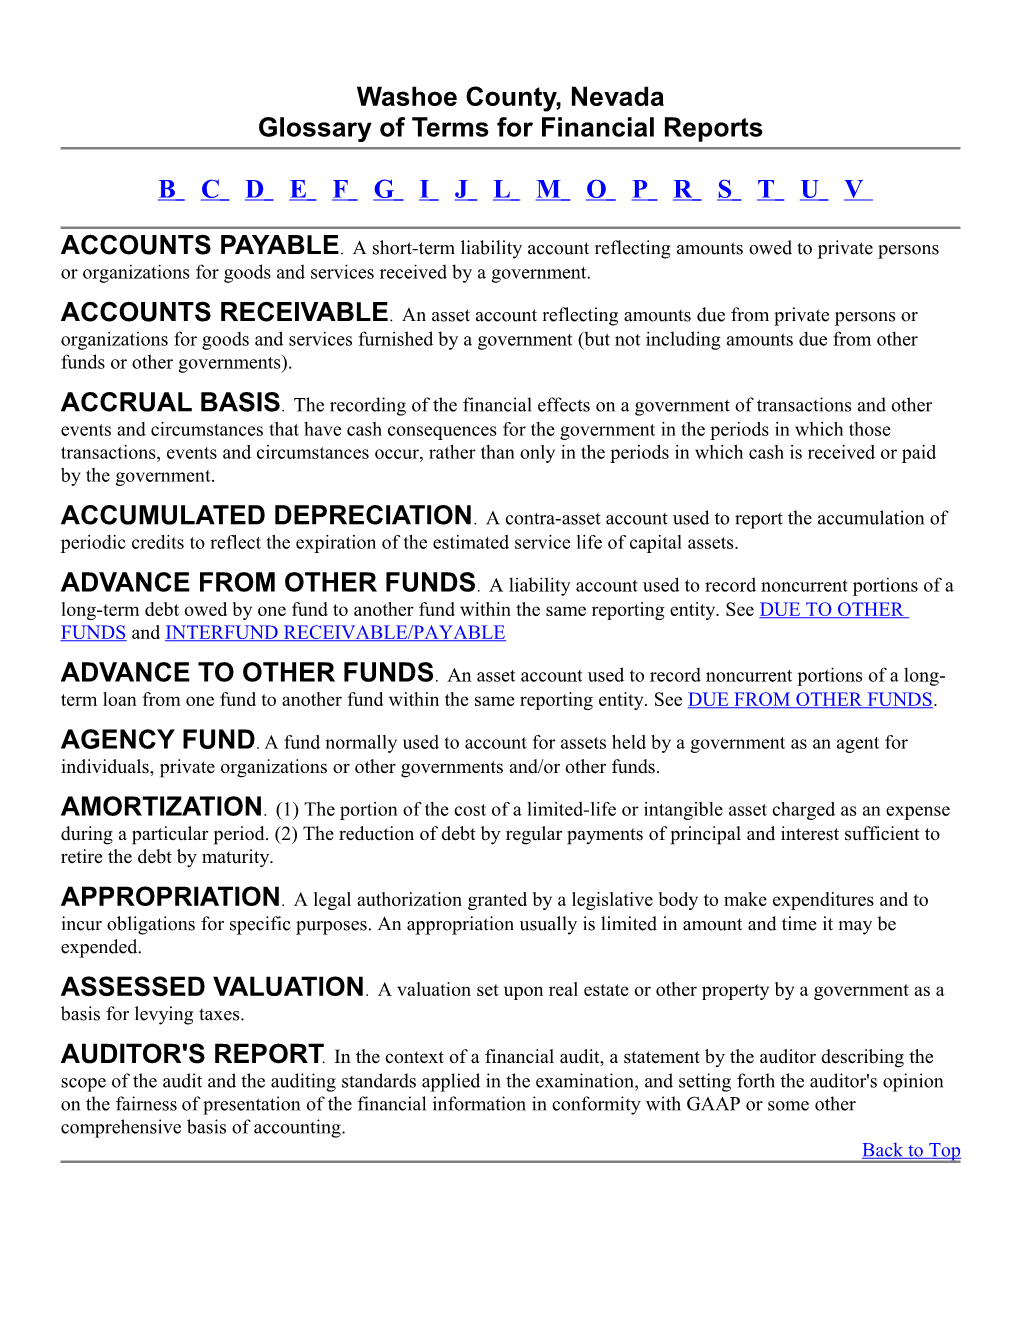 Washoe County, Nevada Glossary of Terms for Financial Reports